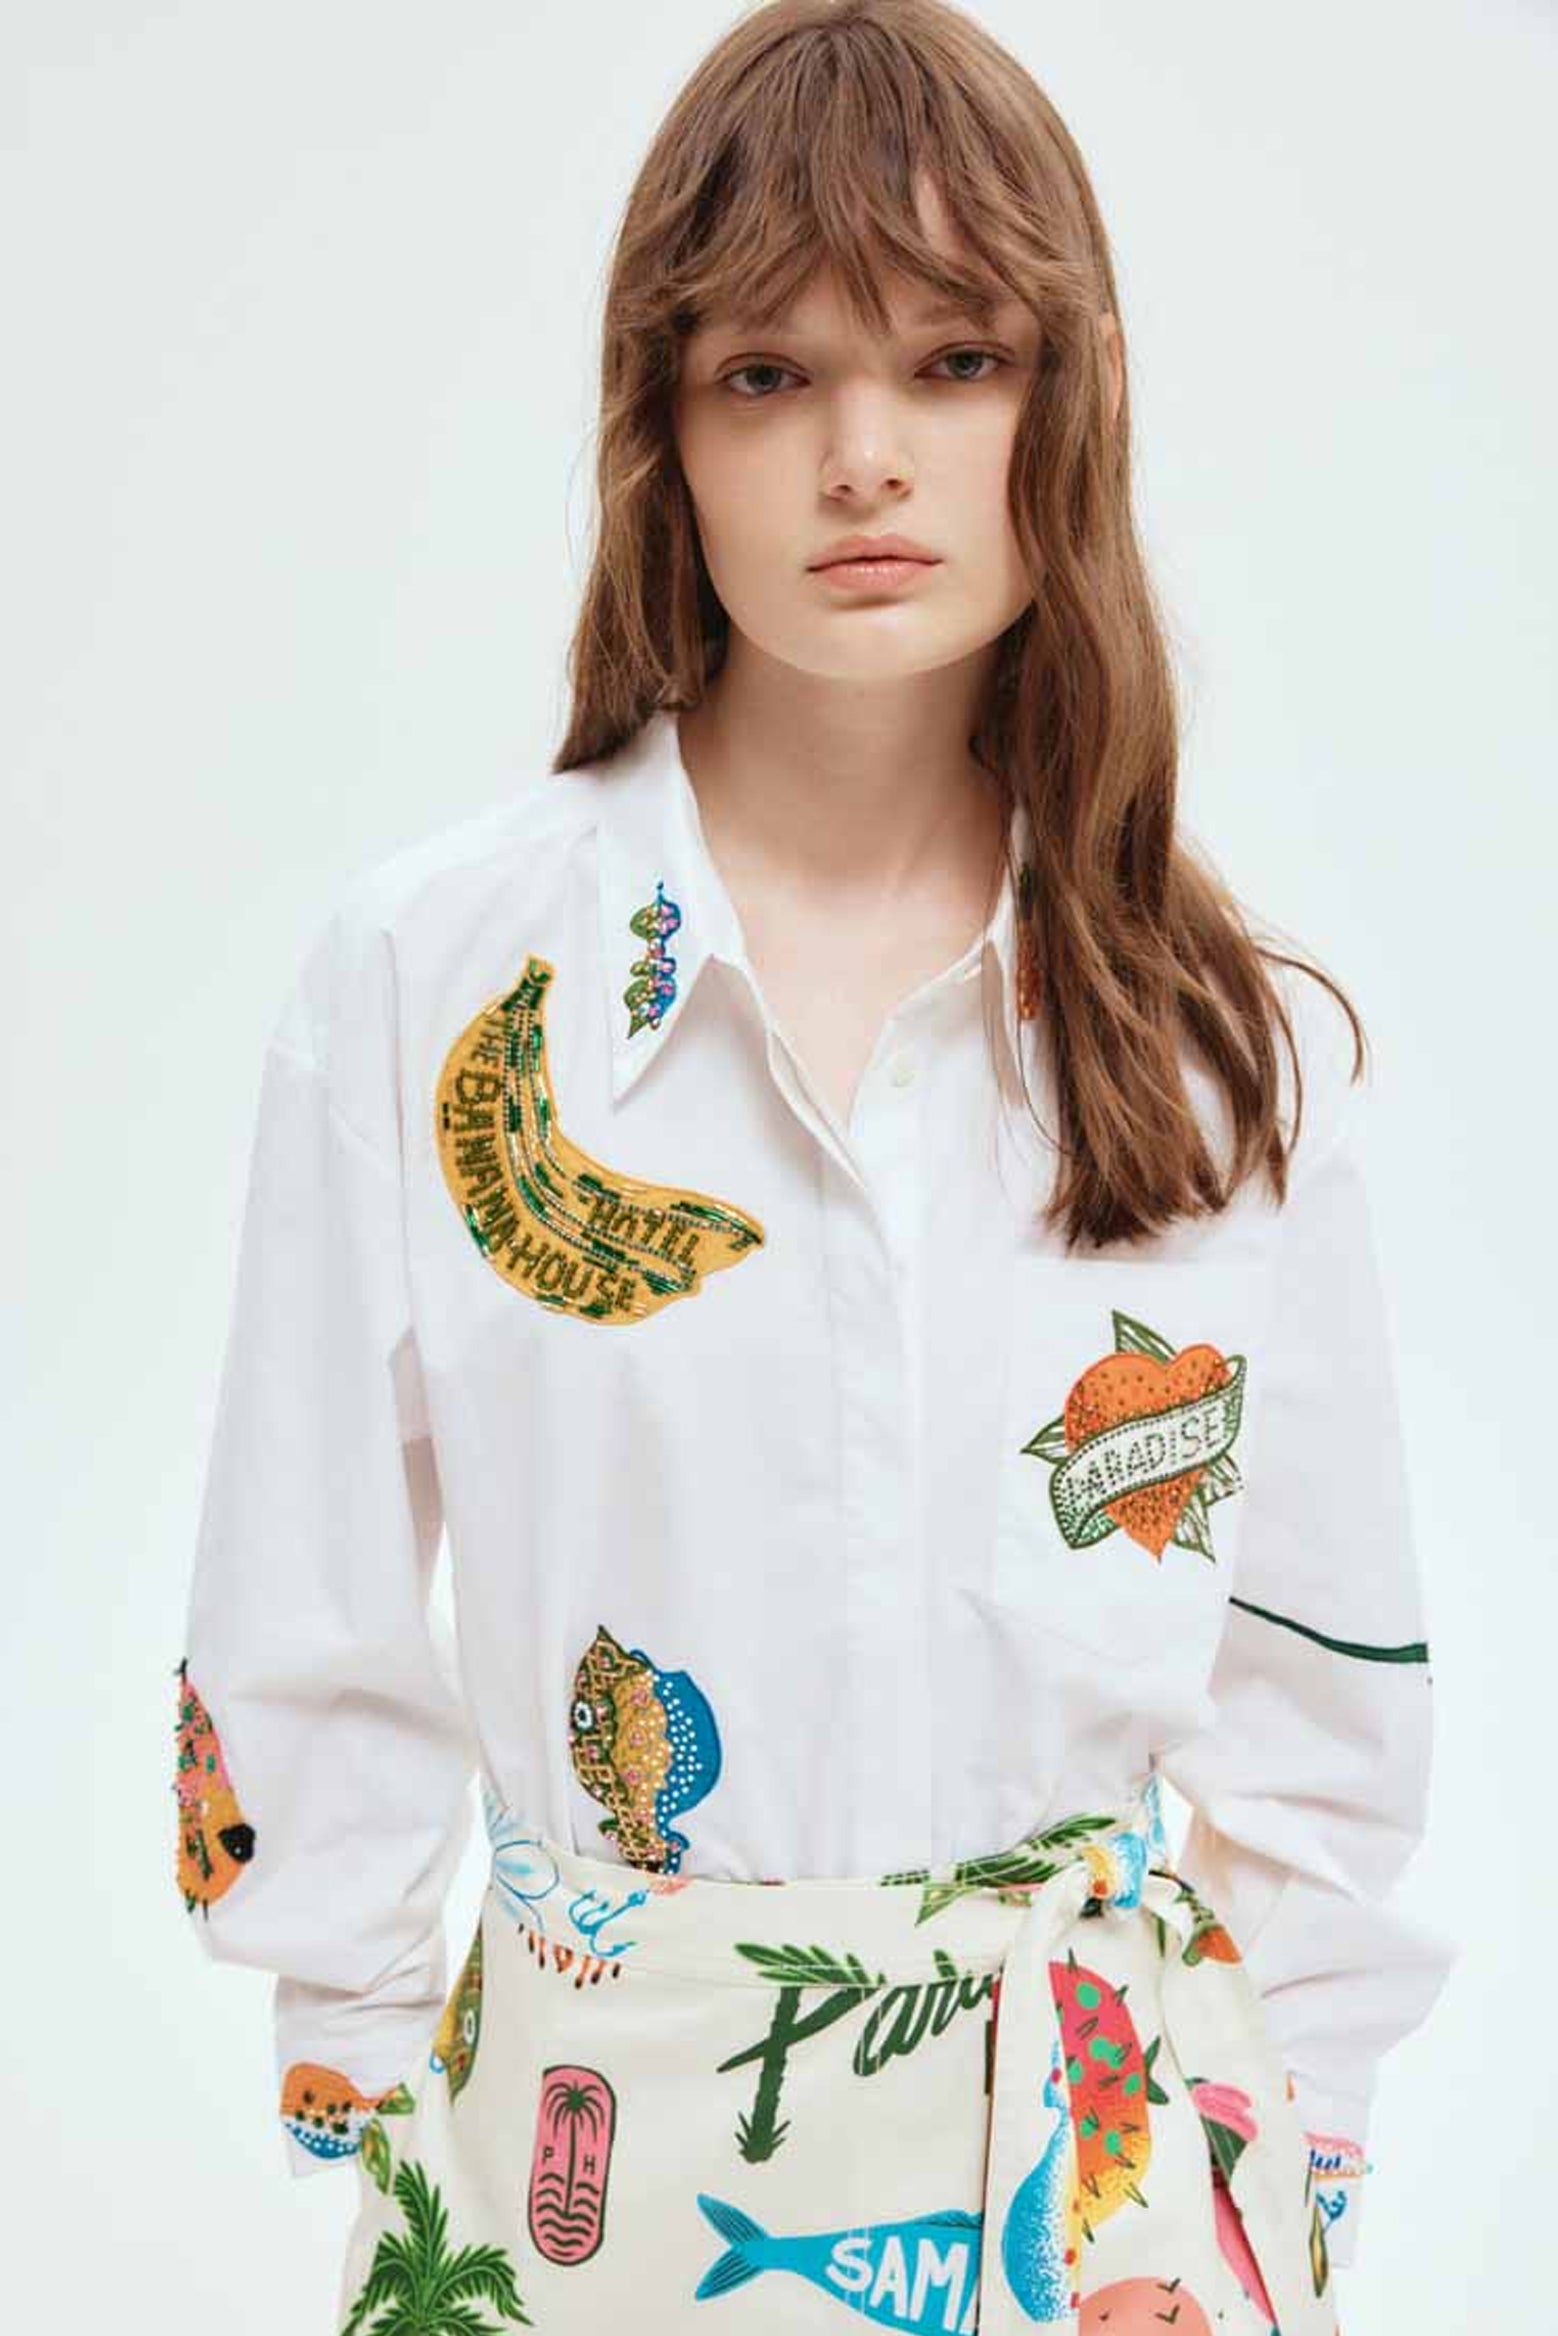 Alémais Clam Embroidered Shirt available at The New Trend Australia.